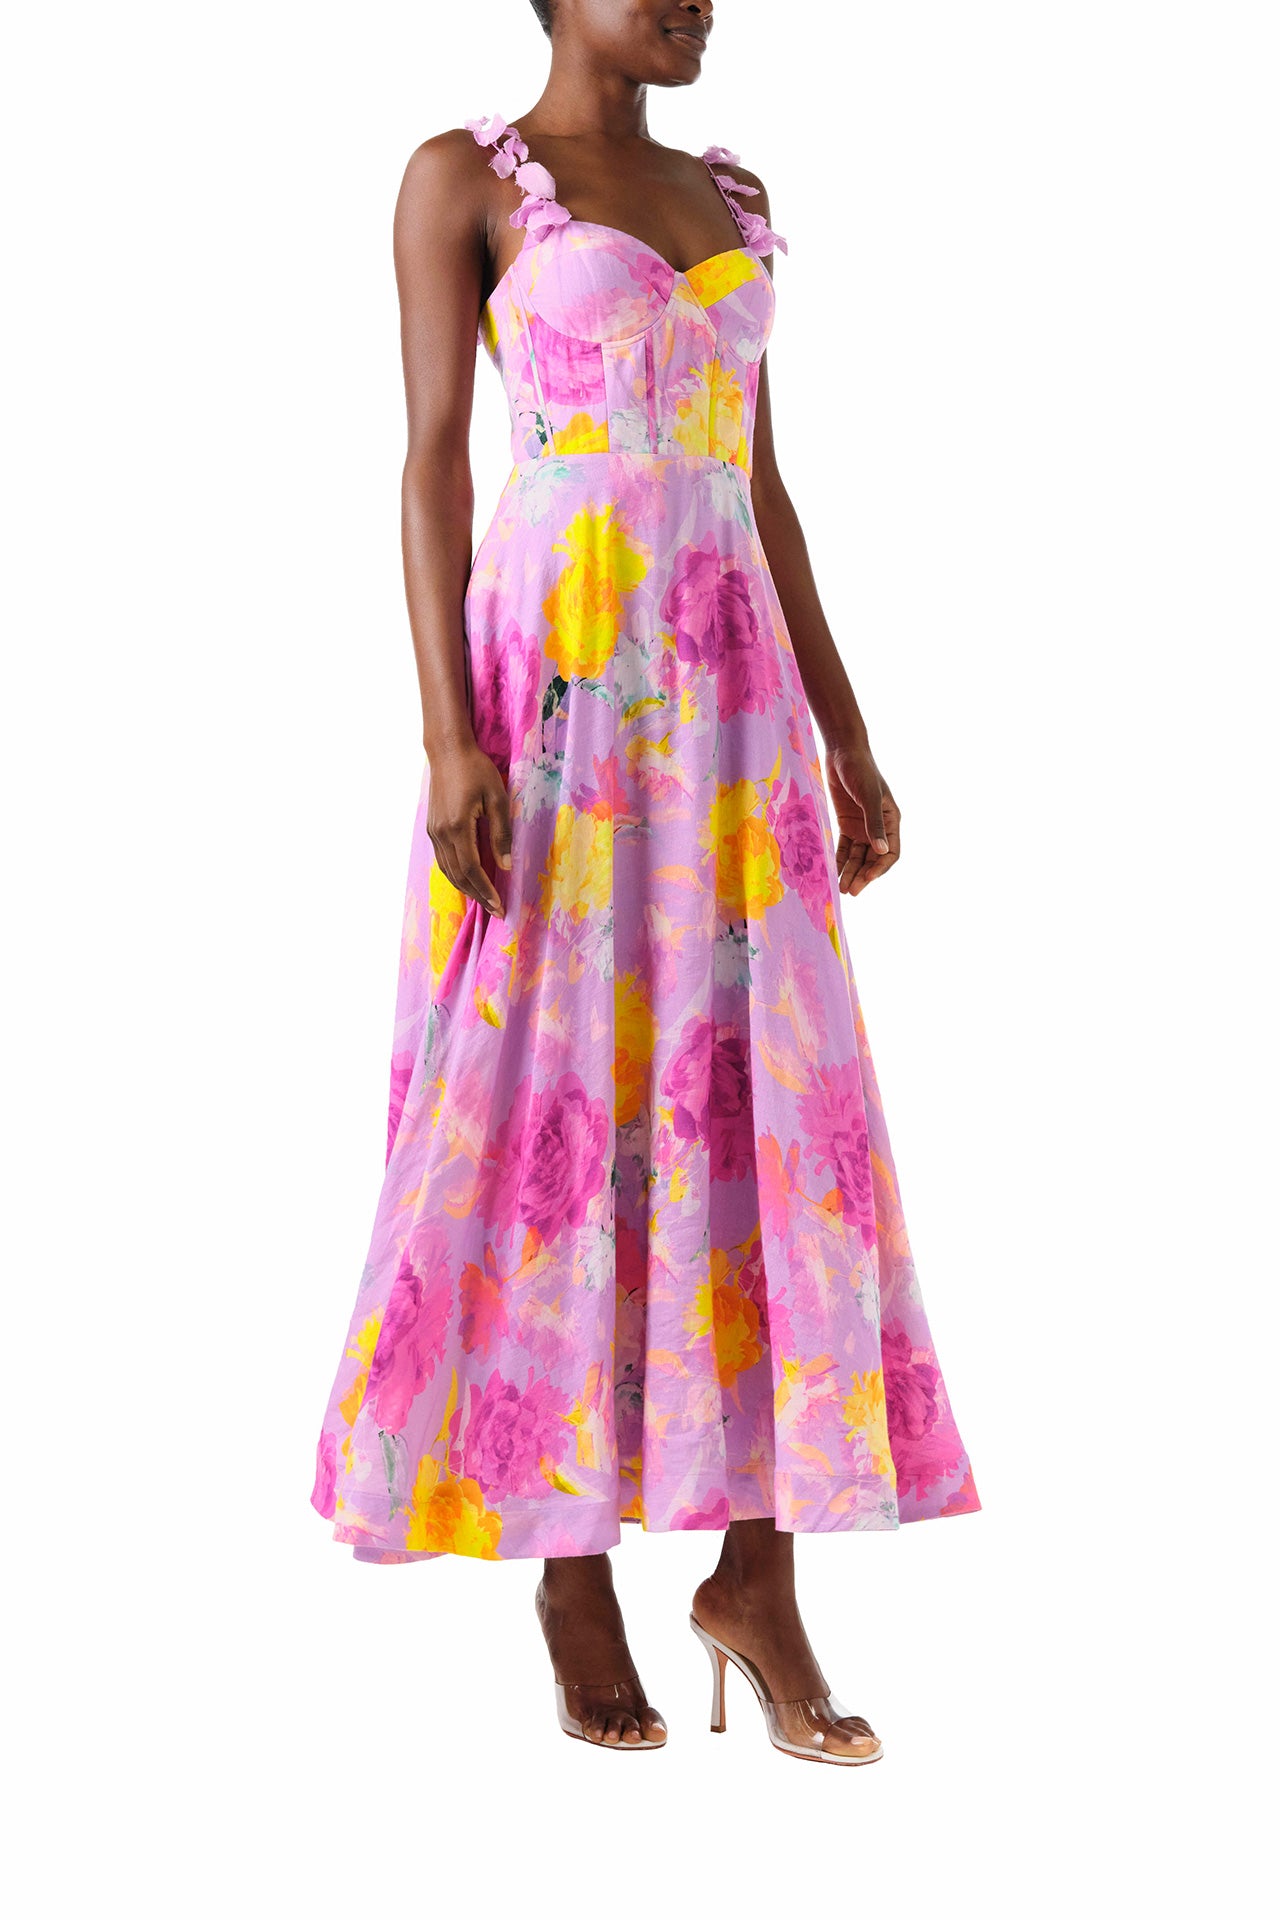 ML Monique Lhuillier 2024 Sleeveless midi dress with floral appliqued spaghetti straps and corset bodice in pink, purple and yellow floral printed linen - right side.